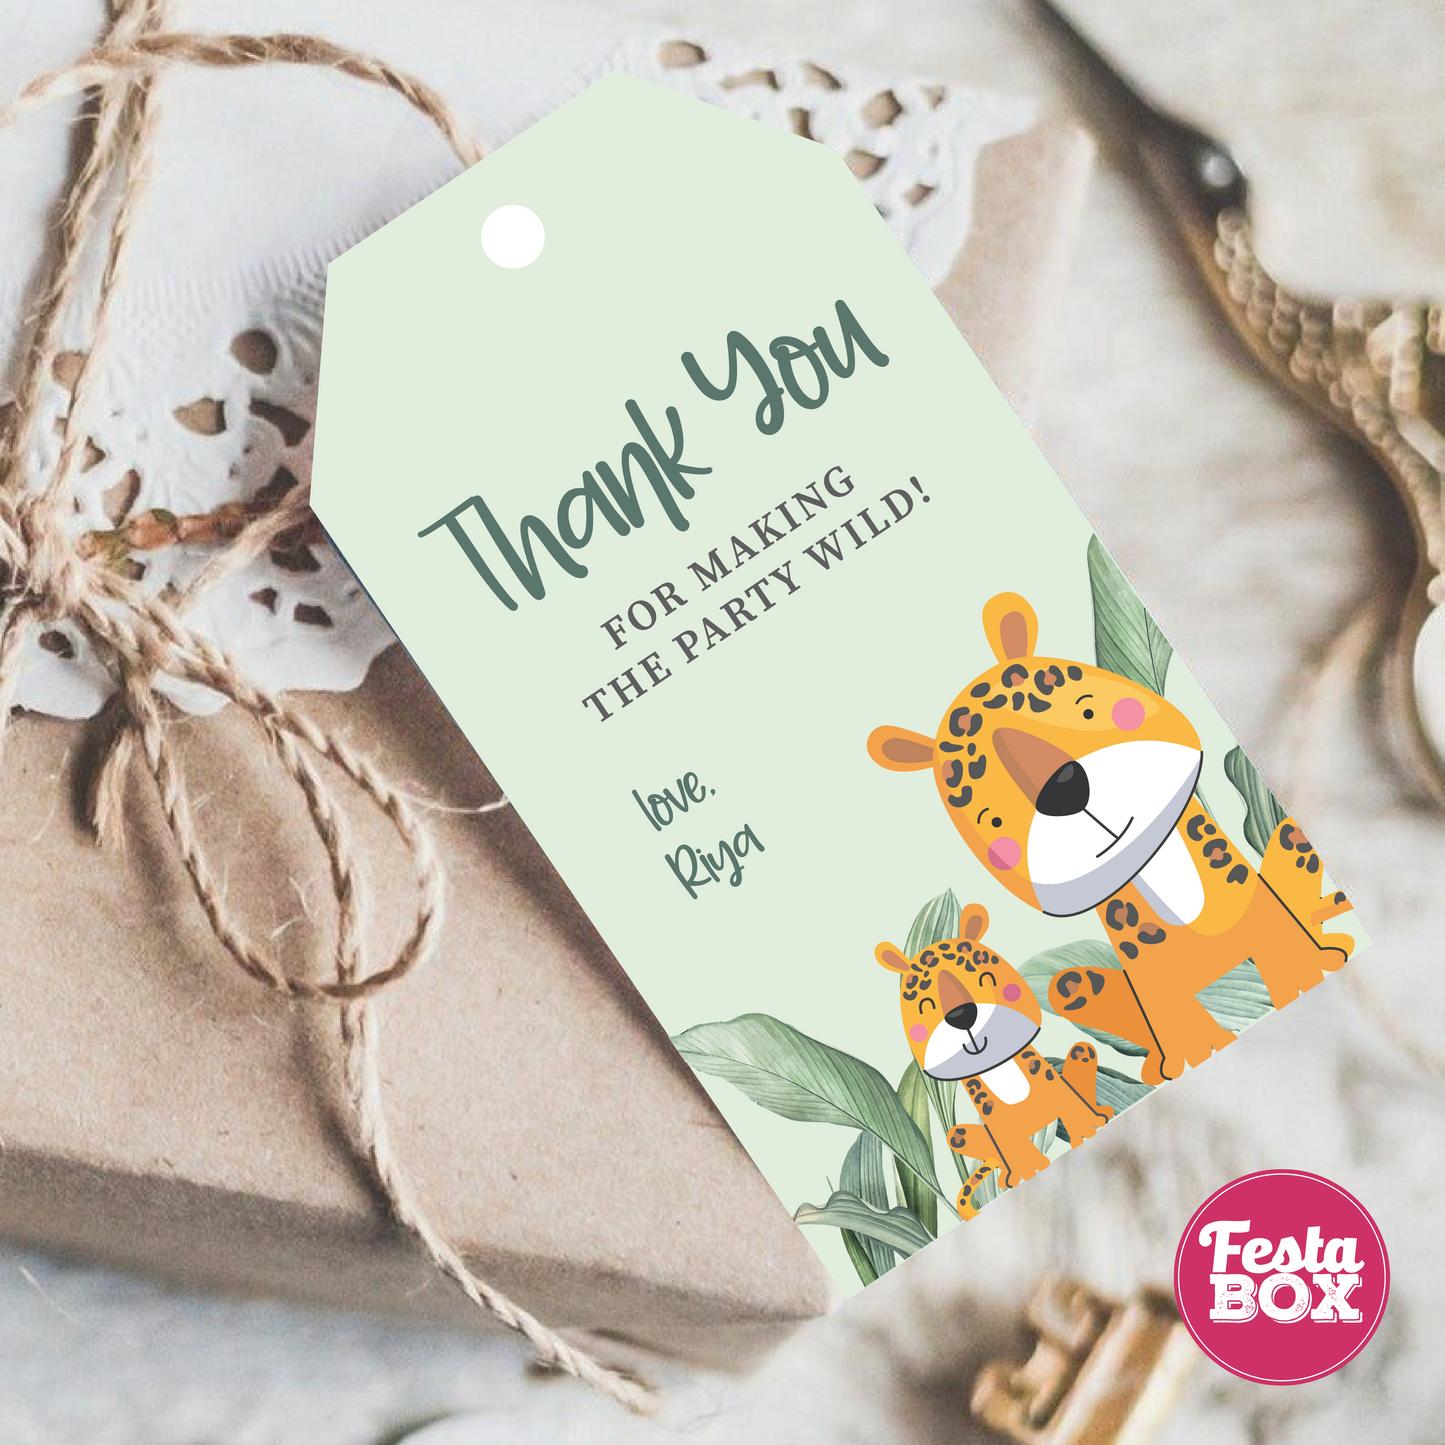 Gift Tags for Baby Shower under the Jungle Safari Theme by Festabox